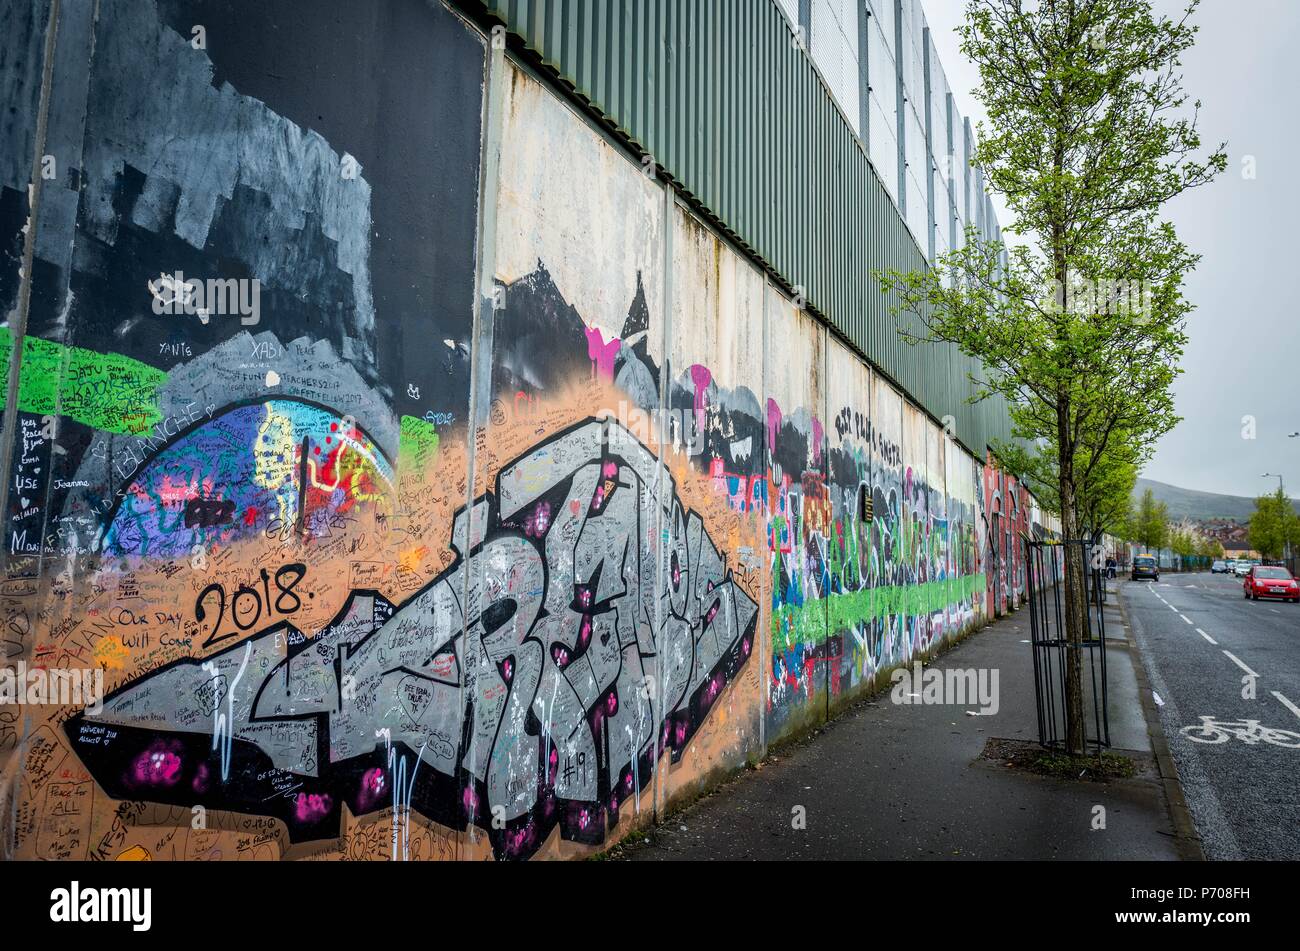 21/06/2018. Northern Ireland, United Kingdom. Northern Ireland. Picture taken April 28th, 2018. Children sign the peace wall near the Shankill Estate, Belfast, Northern Ireland. Belfast Northern So-called Peace Wall  dividing the loyalist (Protestant) Shankhill and republican Catholic Falls Road suburbs.Photo By Andrew Parsons/ Parsons Media Ltd Stock Photo